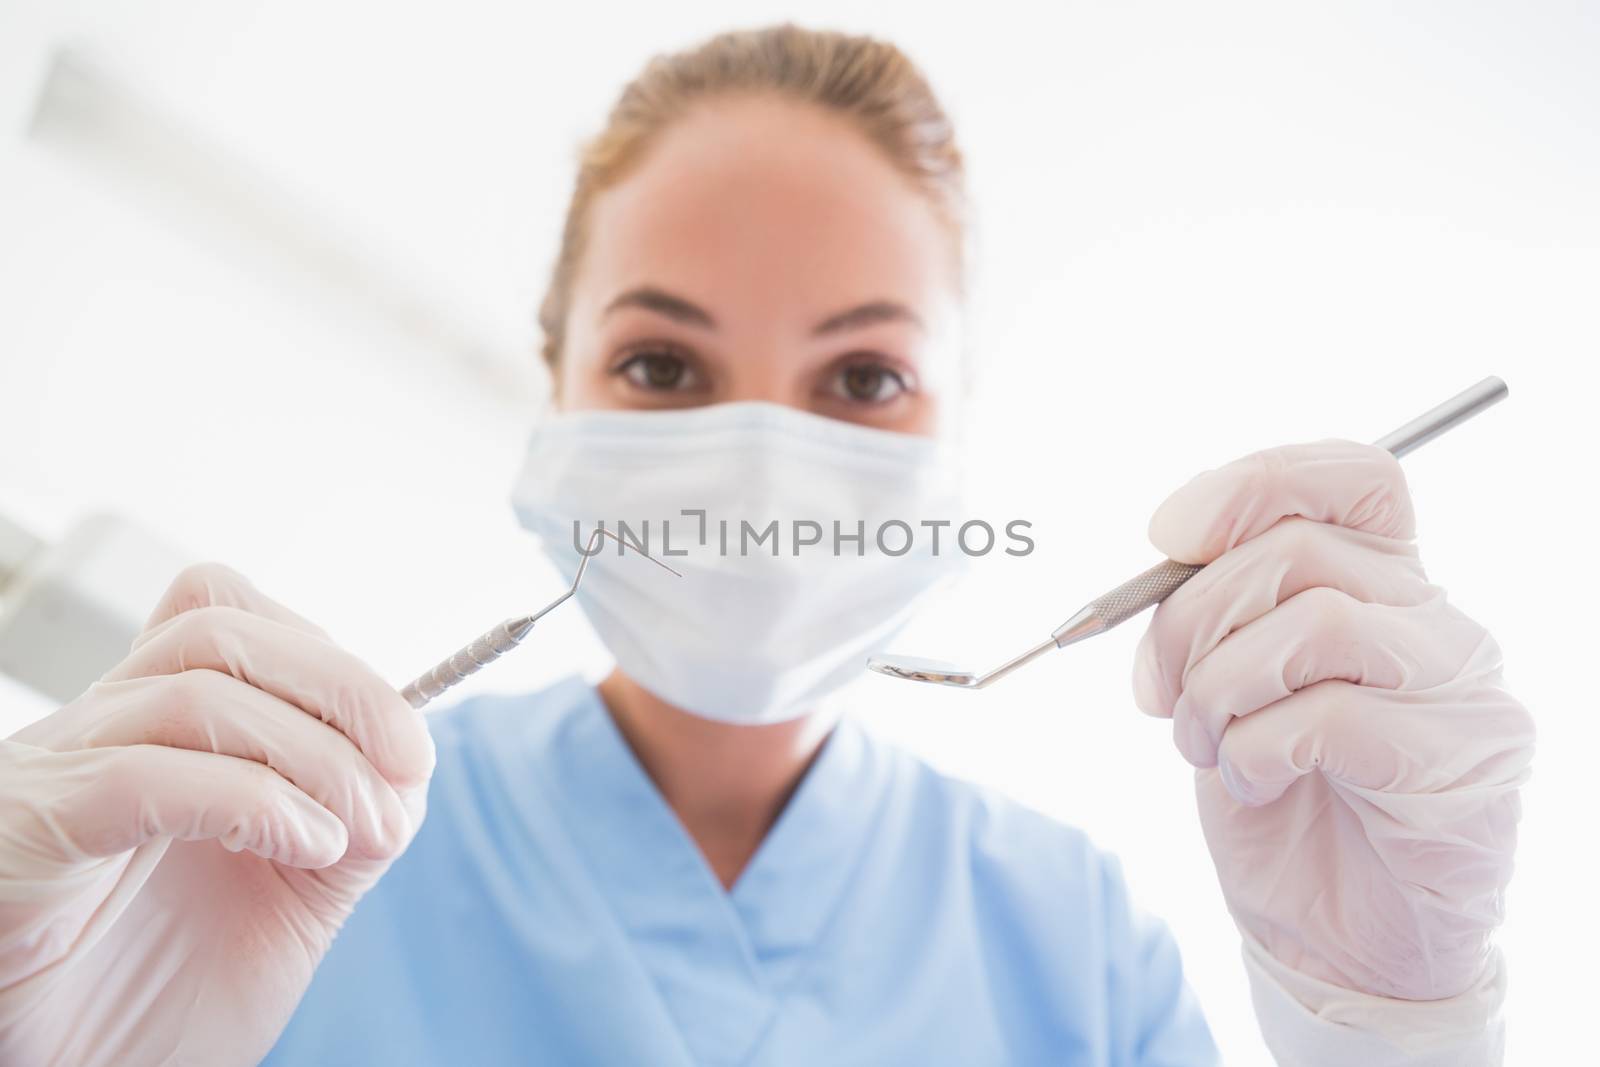 Dentist in surgical mask holding tools over patient by Wavebreakmedia